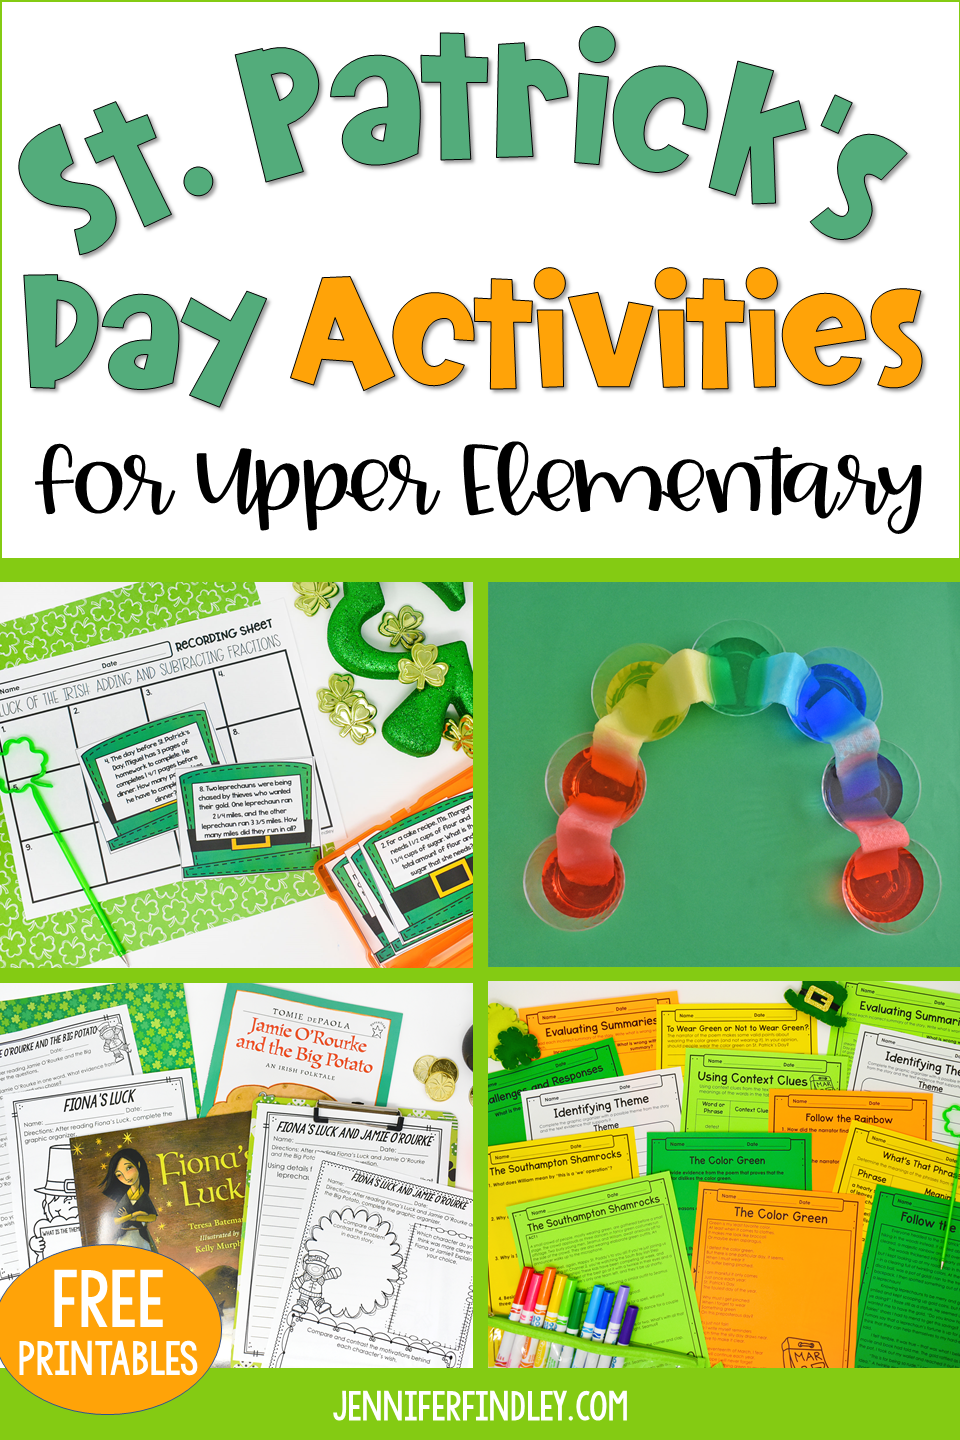 St. Patrick’s Day activities for 4th and 5th graders! Engage your 4th and 5th graders during March with these engaging St. Patrick’s Day activities and freebies. 